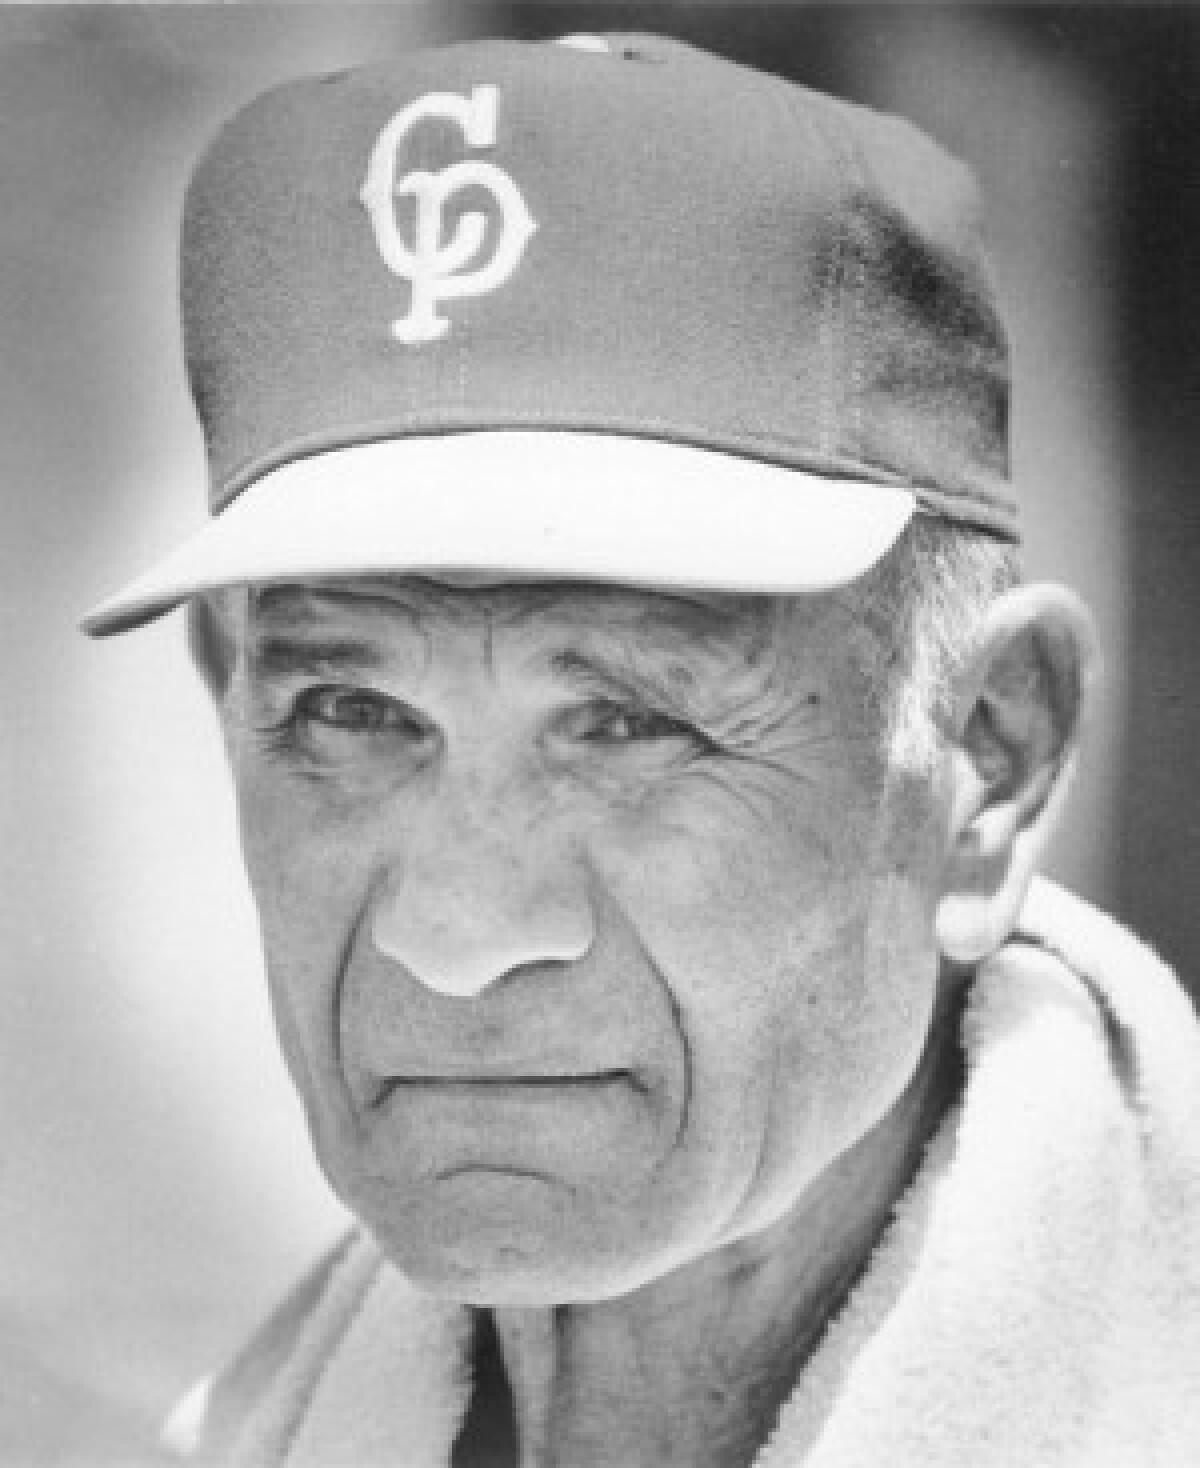 John Scolinos coached 14 seasons at Pepperdine University before moving to Cal Poly Pomona in 1962. He retired in 1991 with a combined 1,198 victories.